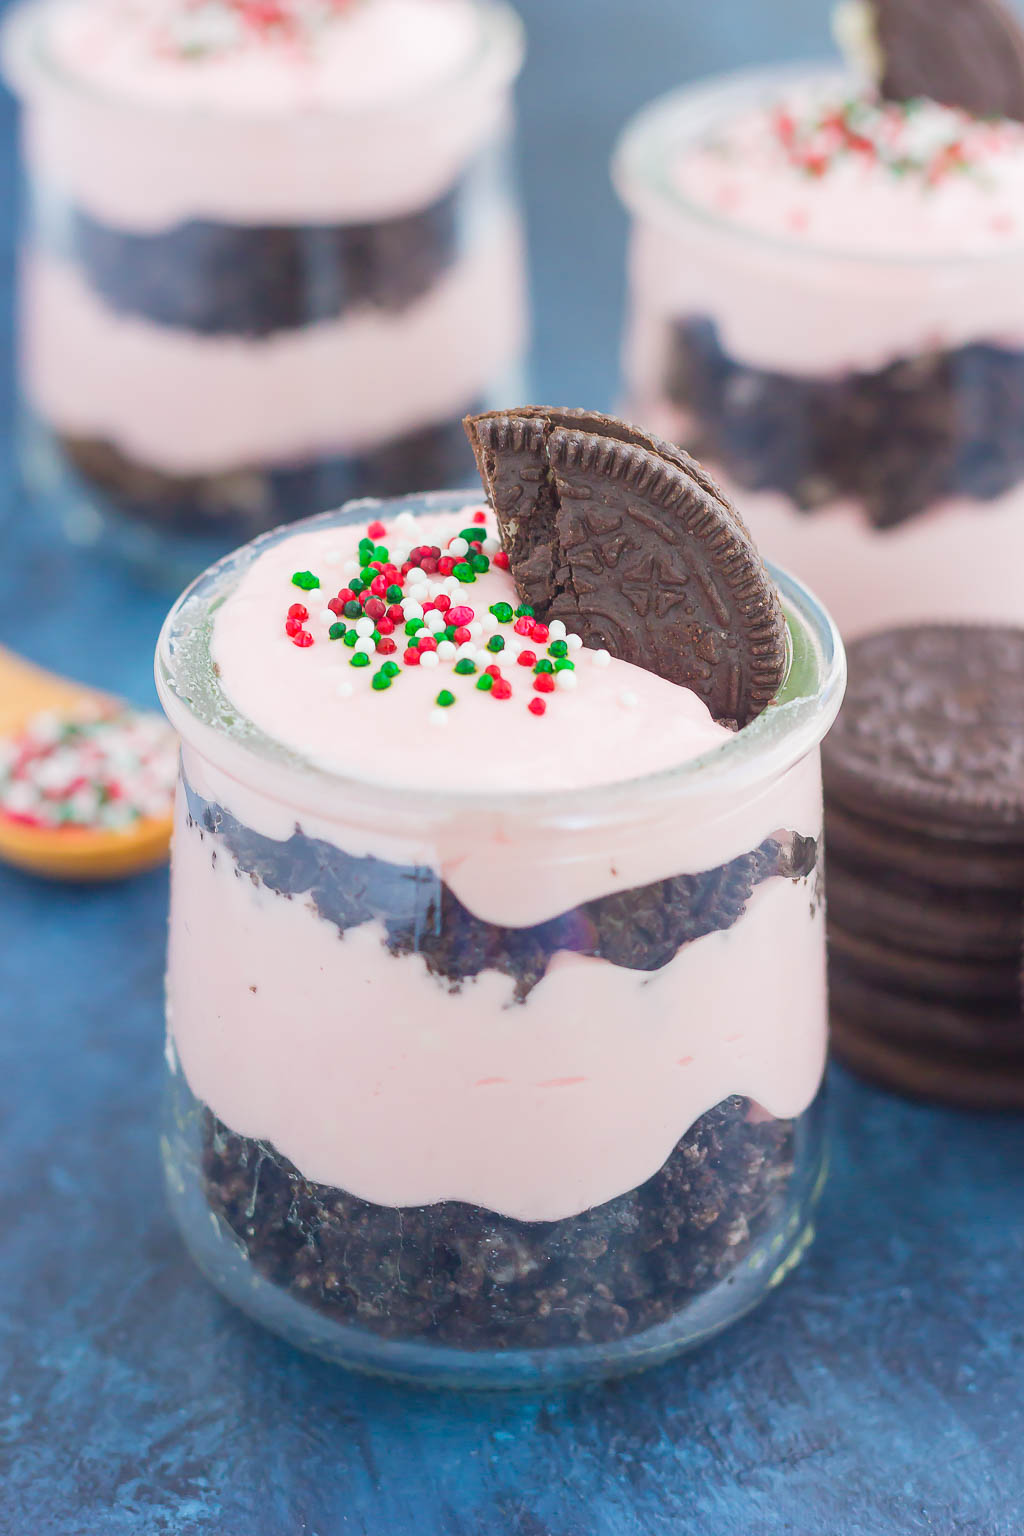 This No Bake Peppermint Oreo Cheesecake features a sweet and creamy peppermint cheesecake batter that requires no oven. A rich, Oreo cookie crust and festive sprinkles make this cheesecake perfect for the holidays! #cheesecake #nobakecheesecake #peppermintcheesecake #oreocheesecake #christmasdessert #holidaydessert #dessert